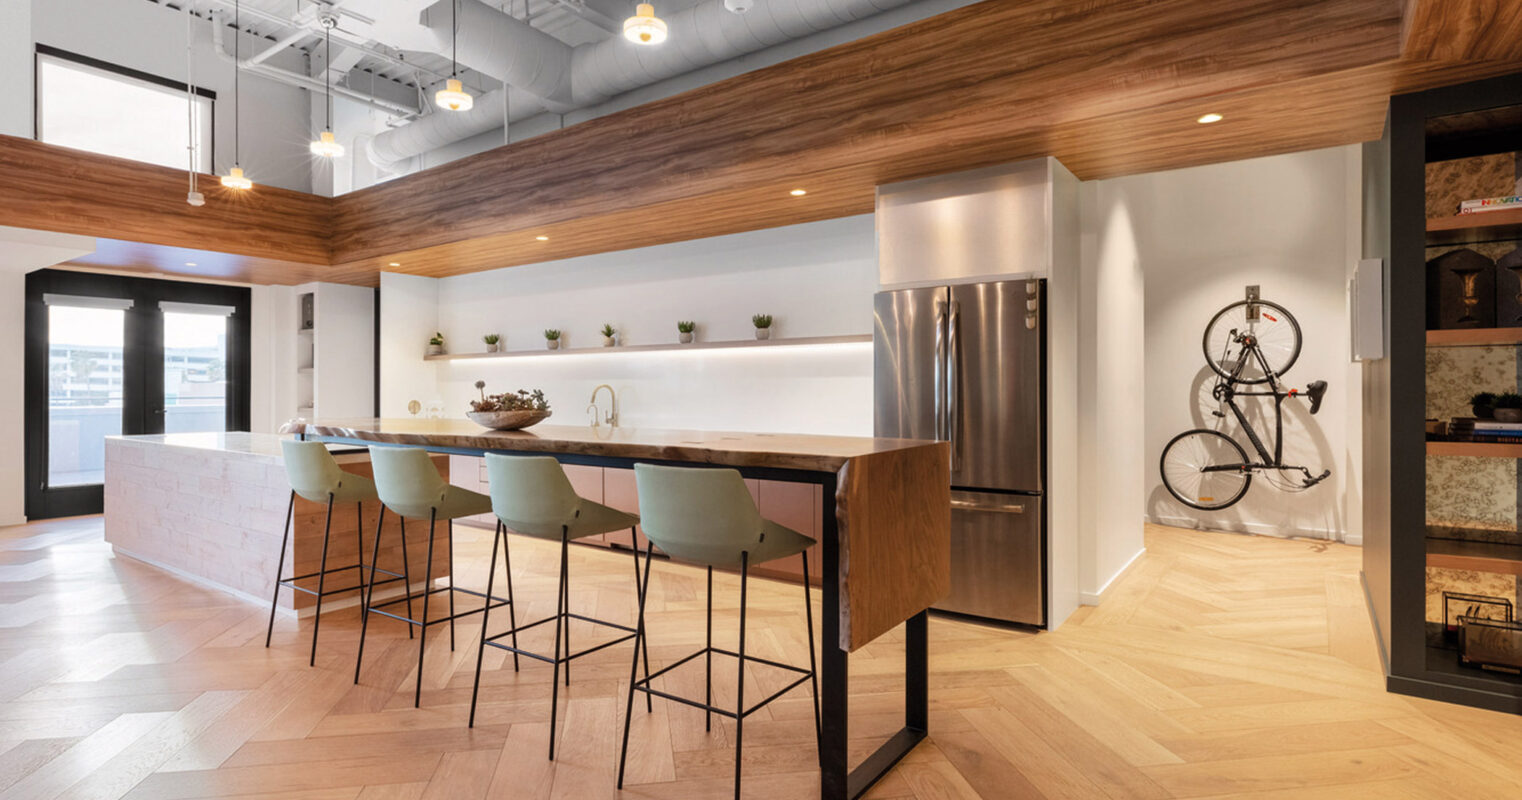 Modern kitchen with a blend of natural wood tones and sleek white cabinetry, featuring an island with bar seating, stainless steel appliances, and herringbone wood flooring. Exposed ductwork adds an industrial touch above, complementing the warm, contemporary aesthetic.